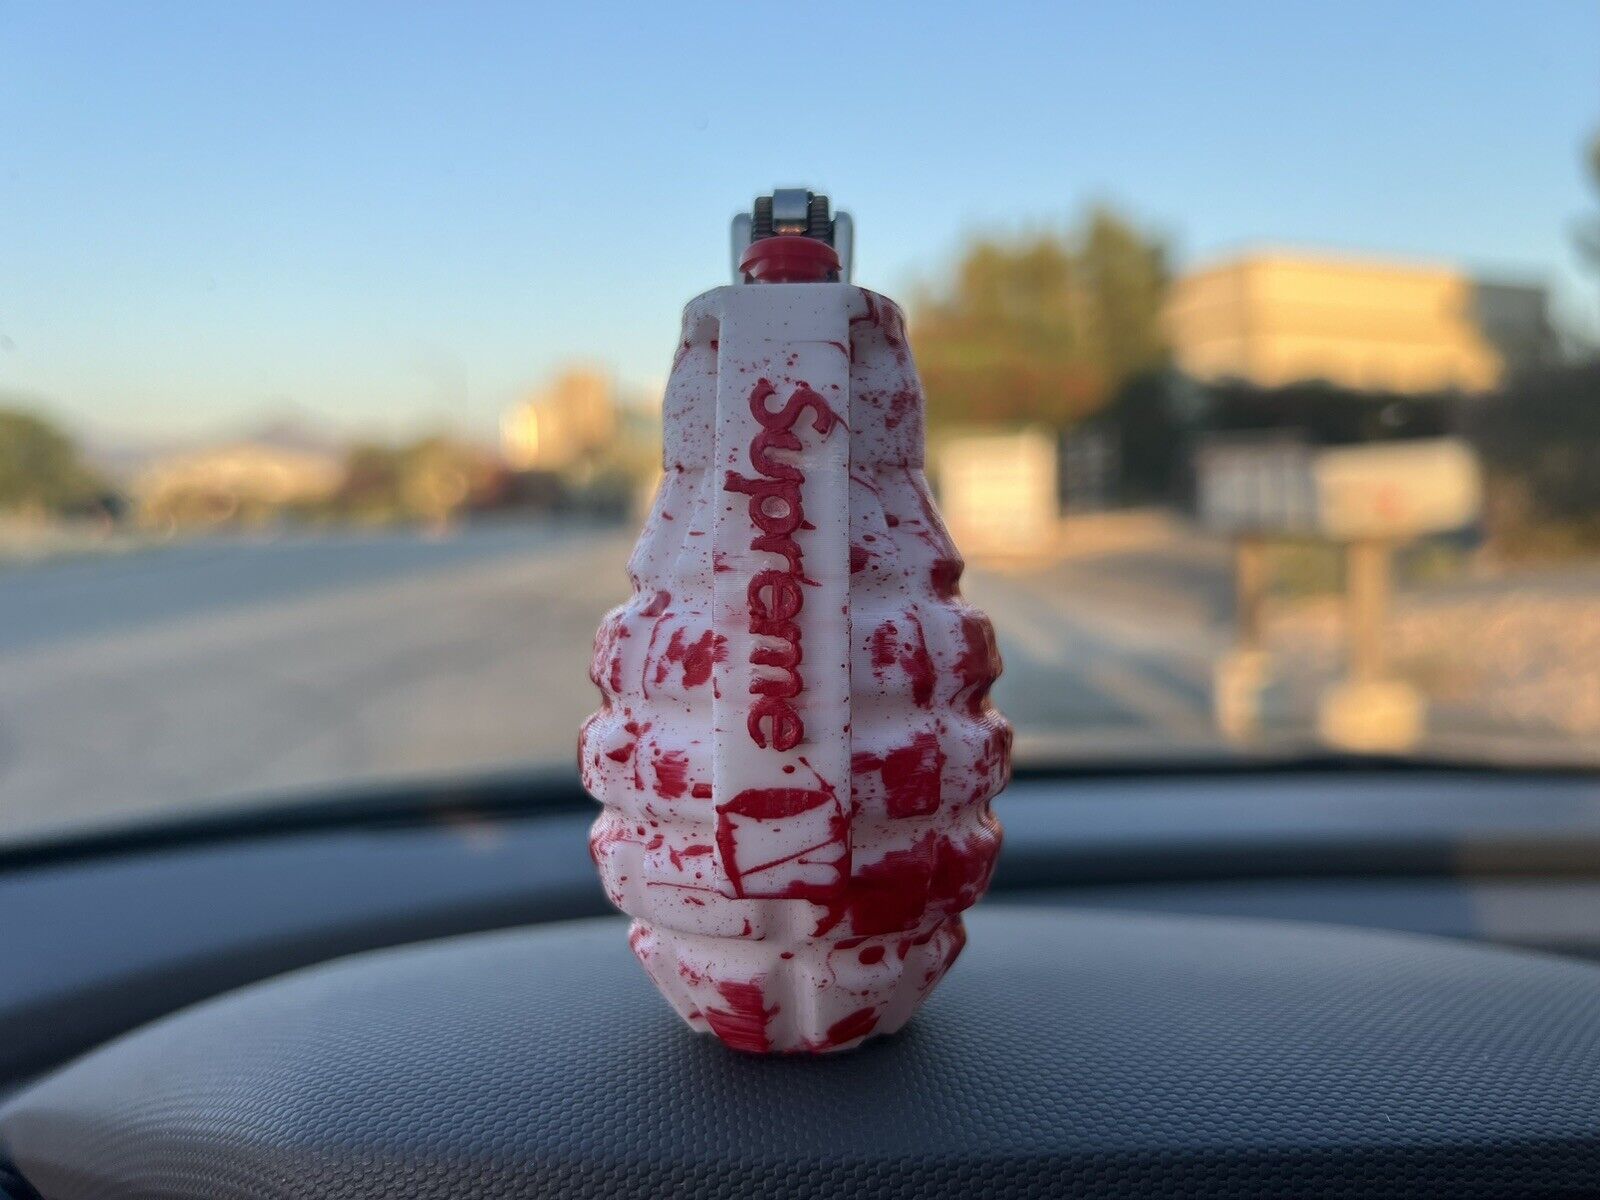 Muther Trucking Supreme Lighter Bic Case White With Red Splatter 3D Print